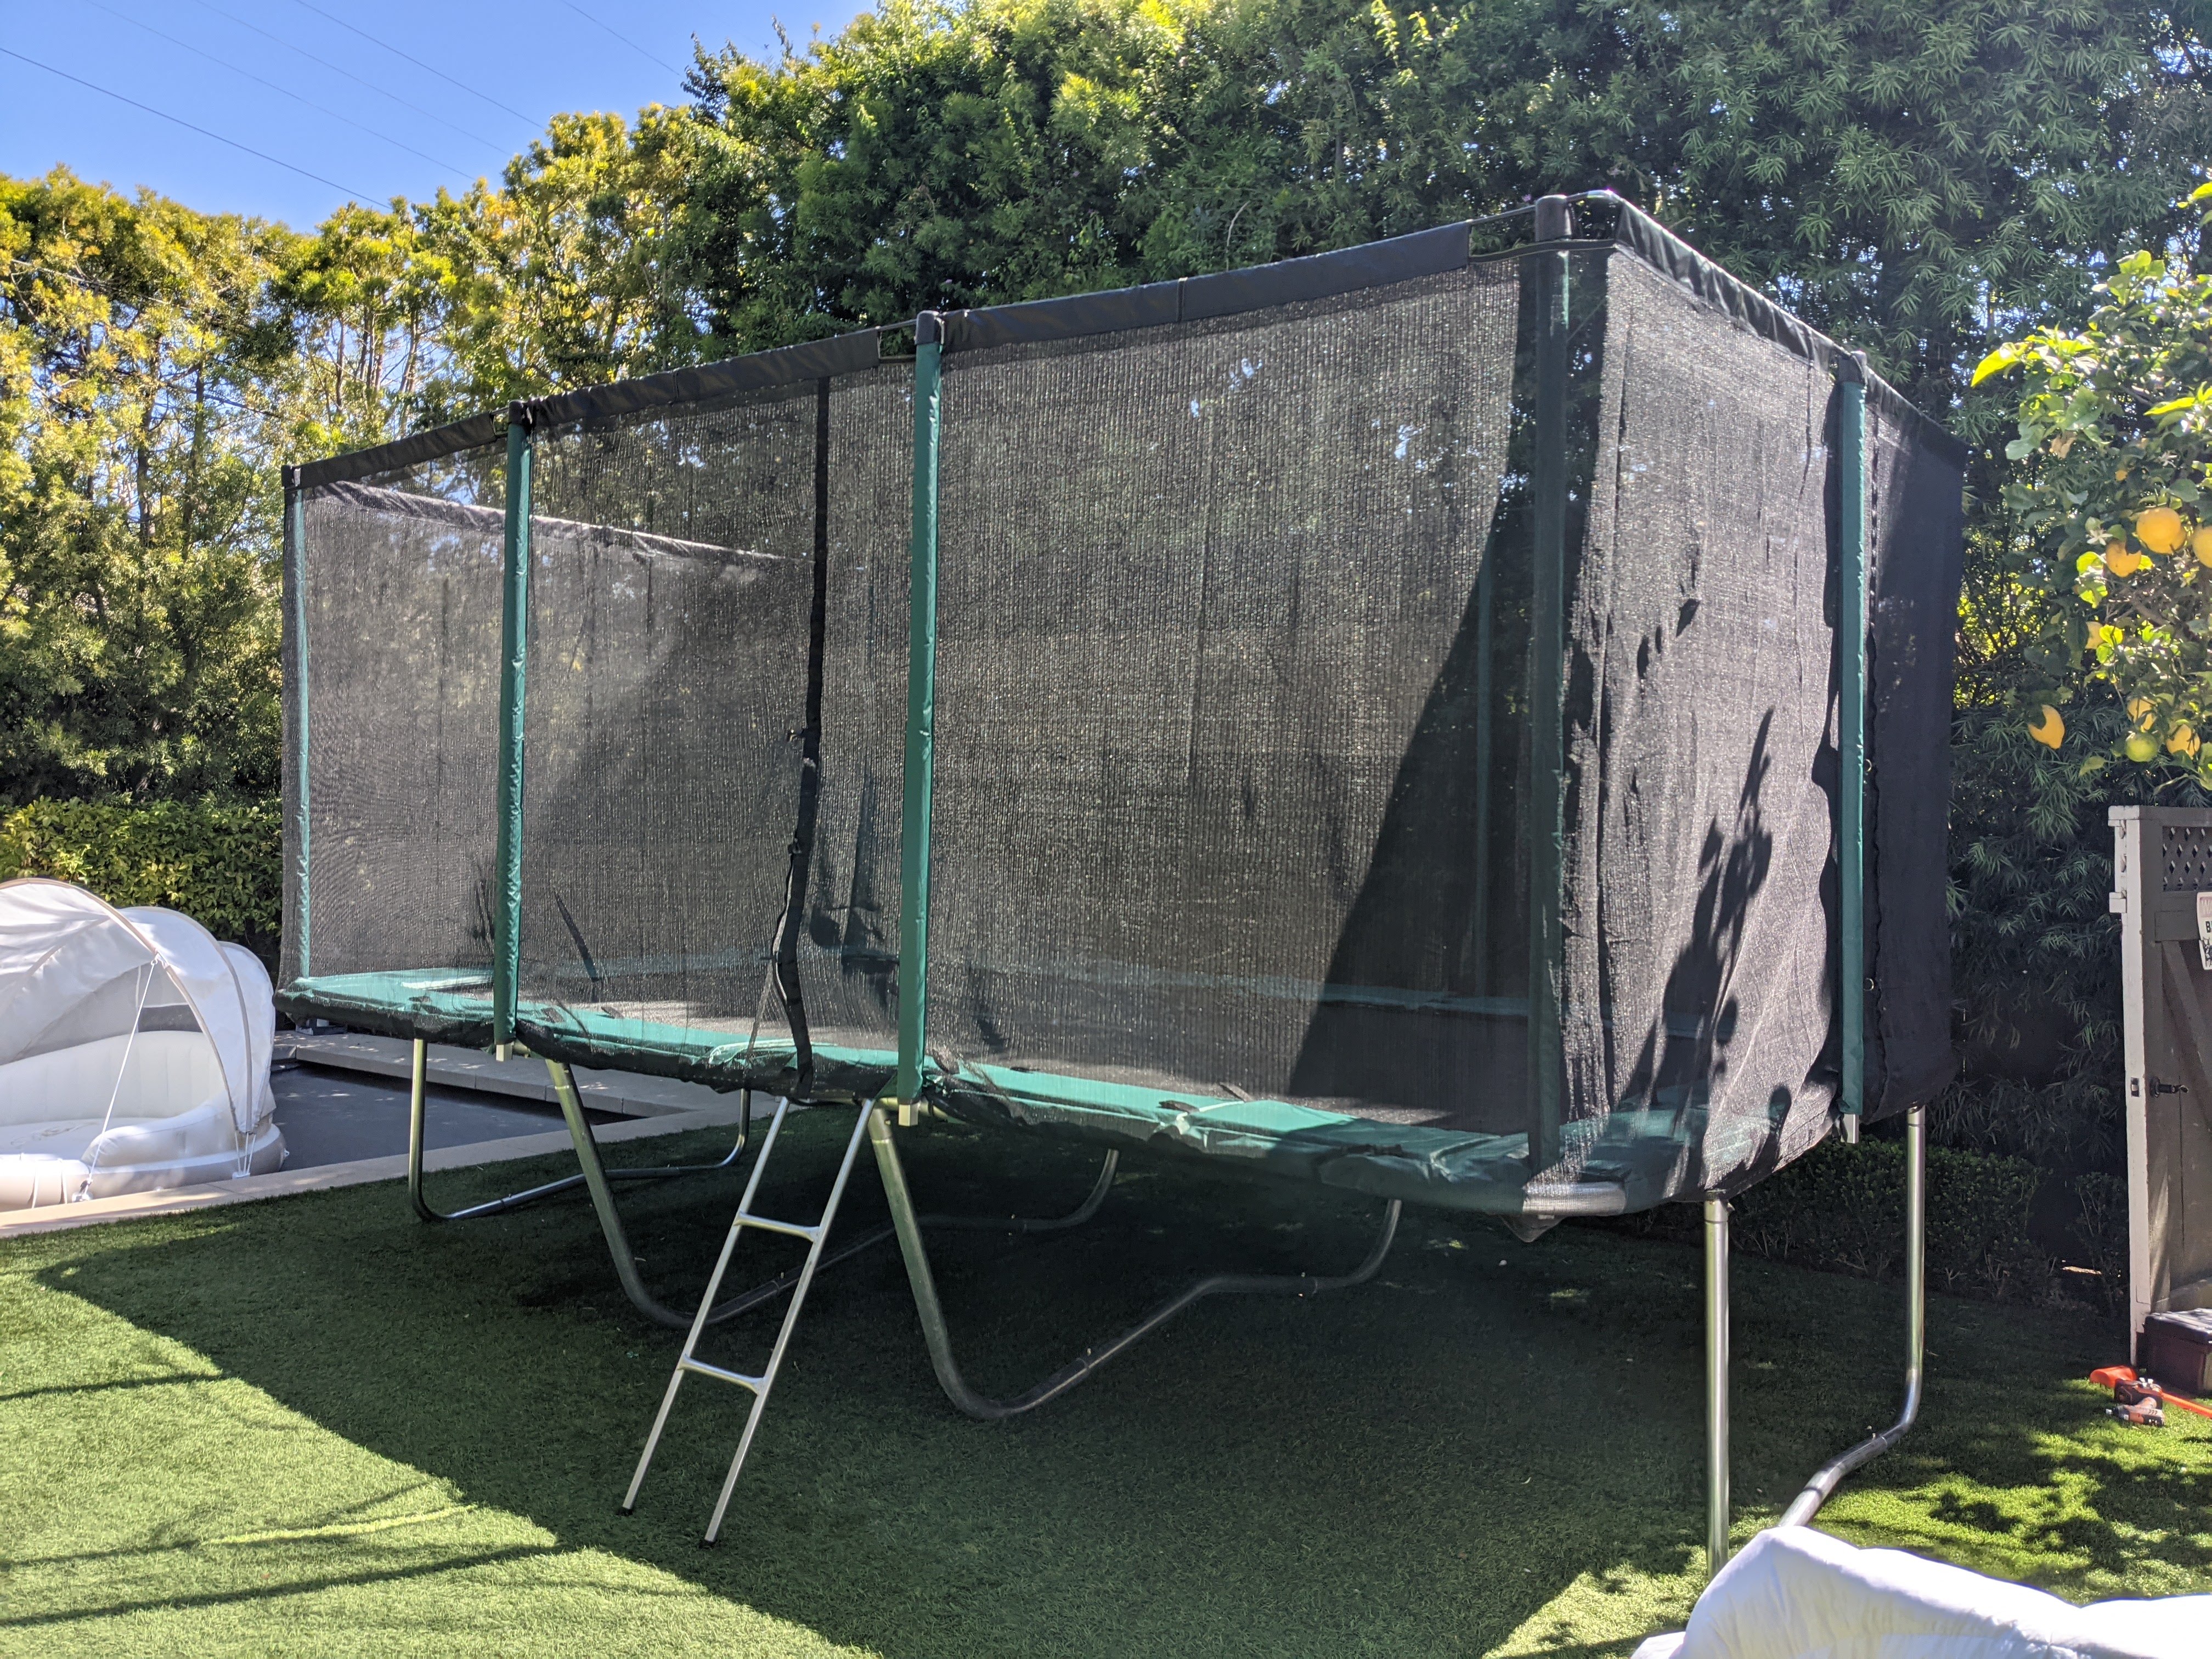 Galactic Xtreme 10x17 FT Outdoor Rectangle Trampoline with Net Enclosure 750Lbs Heavy Weight Jumping Capacity - Outdoor Gymnastics Trampolines for Adults and Kids - image 2 of 7